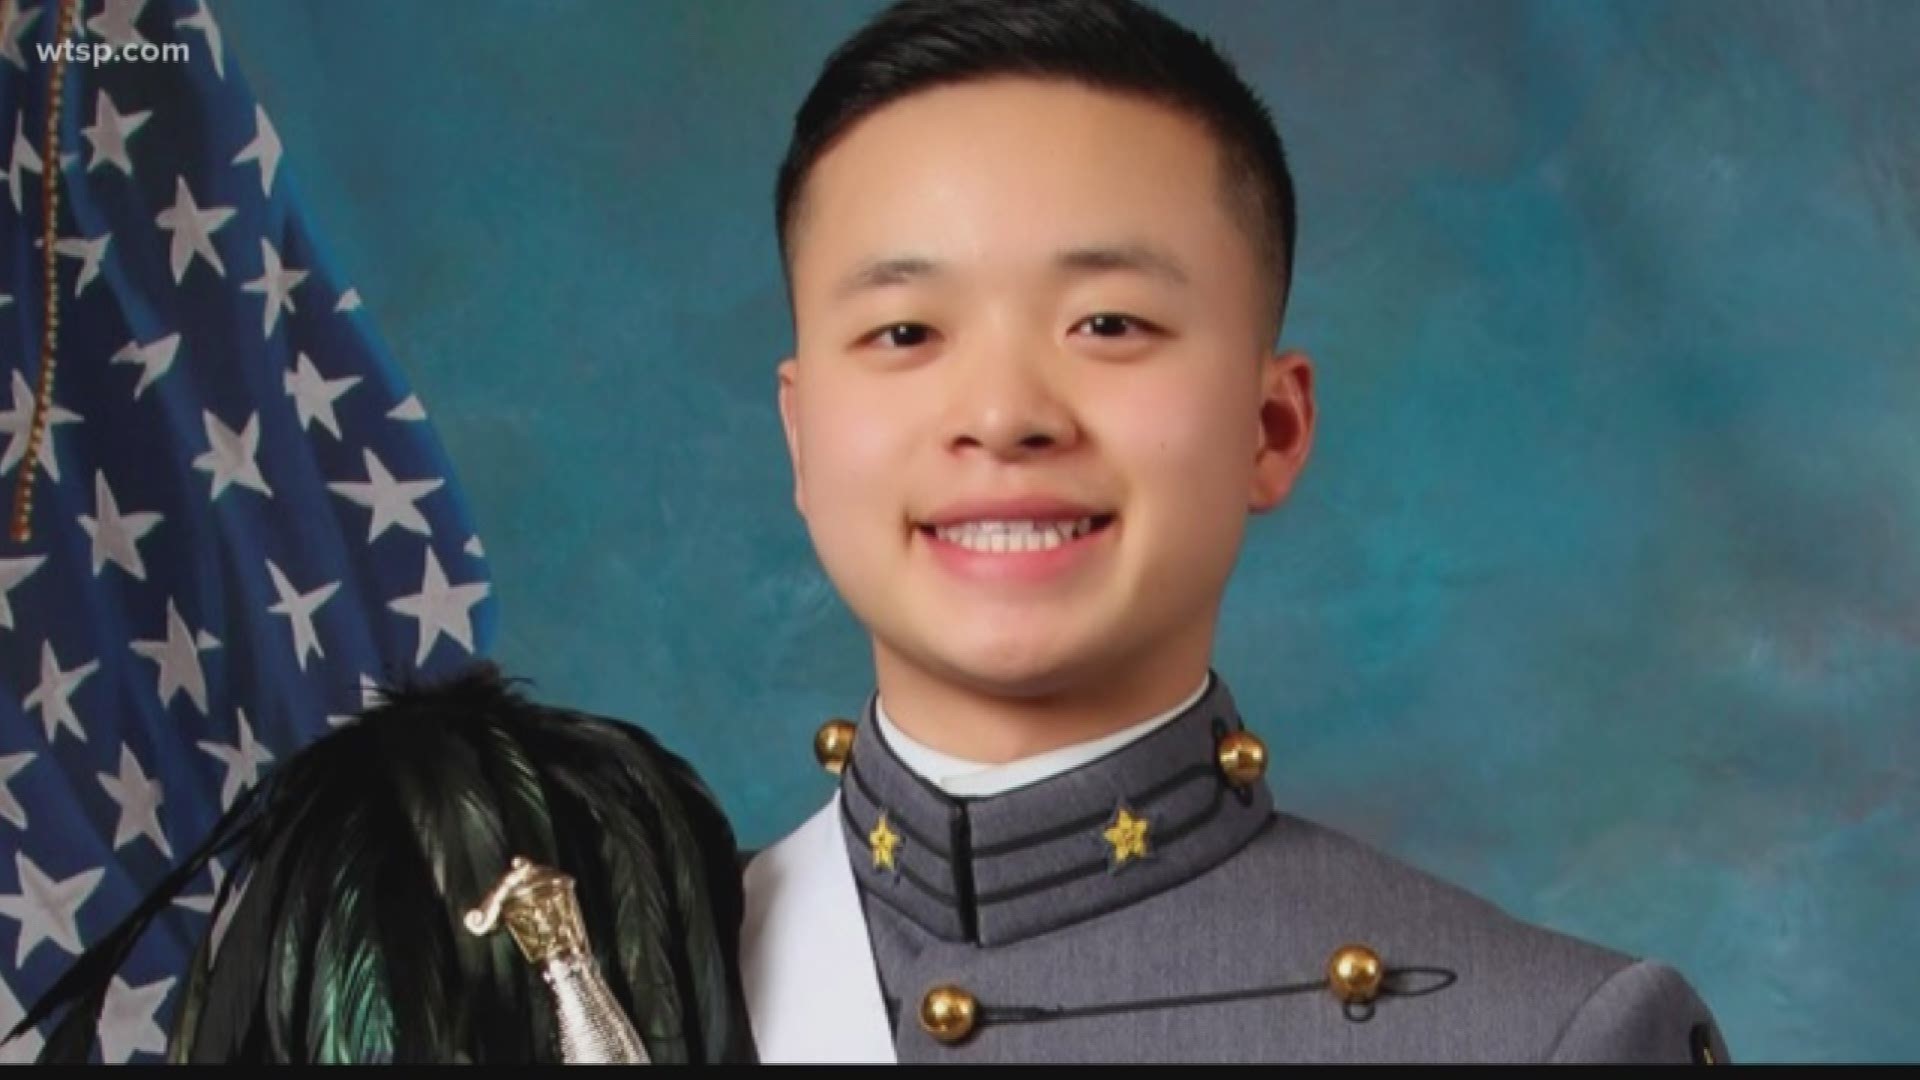 The parents of a 21-year-old West Point cadet fatally injured in a skiing accident can use his frozen sperm to produce a child, a judge ruled while noting potential ethical considerations.

Supreme Court Justice John Colangelo's ruling, dated Thursday, gives Peter Zhu's parents the ability to attempt conception with a surrogate mother using their late son's sperm. The judge said Zhu's parents have not decided whether they will try to use it.

"At this time, the court will place no restrictions on the use to which Peter's parents may ultimately put their son's sperm, including its potential use for procreative purposes," Colangelo wrote.

Zhu, of Concord, California, died after a ski accident in February at West Point. His parents received court permission to have his sperm retrieved and frozen at the same time he underwent organ donation surgery, but the judge waited until last week to rule on whether they could attempt reproduction. The sperm is preserved at a sperm bank.